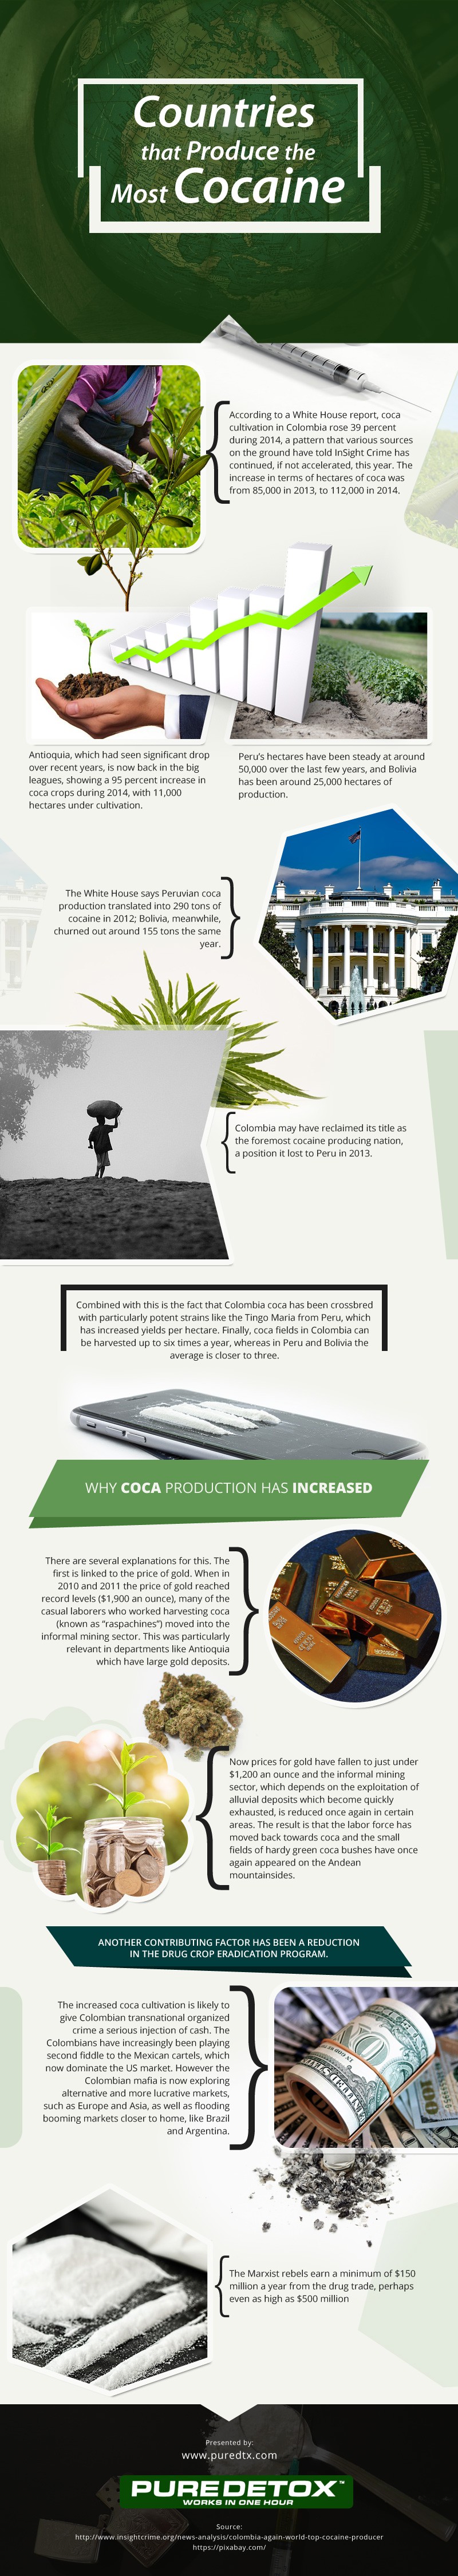 Countries Produce the Most Cocaine[infographic]